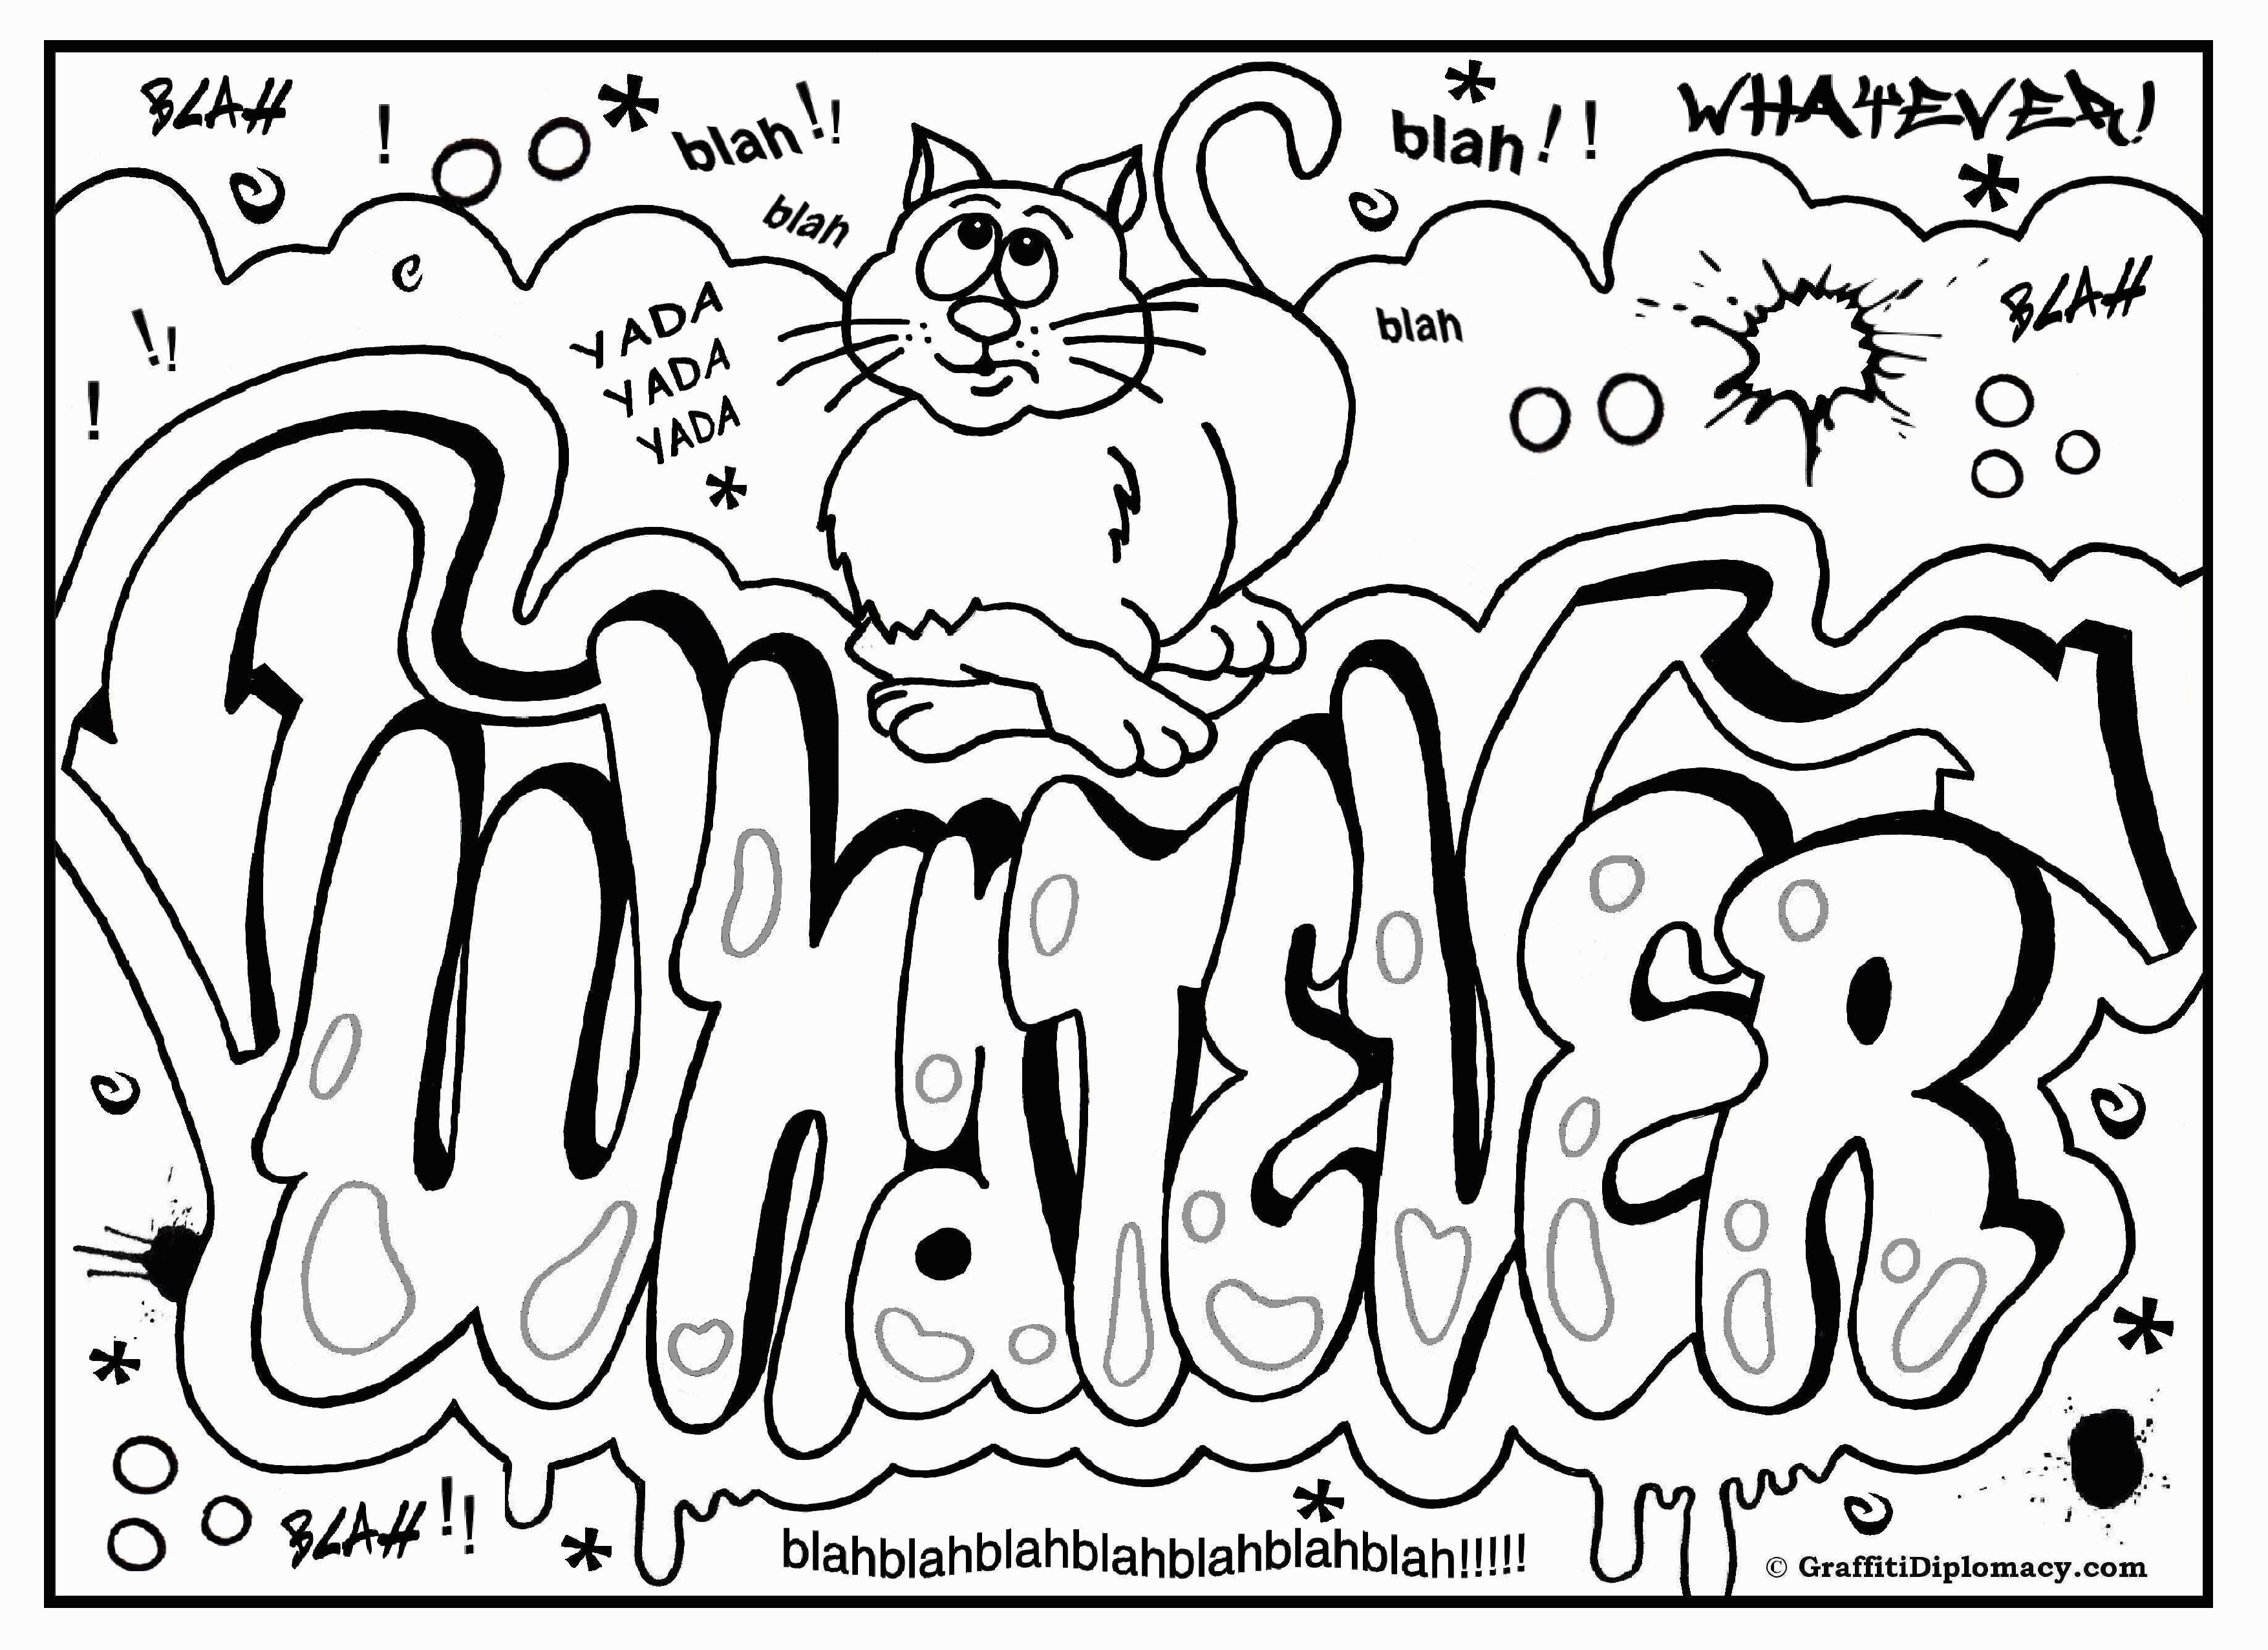 My Room Coloring Pages Multicultural Graffiti Art Free Printable Coloring Pages Free Photo